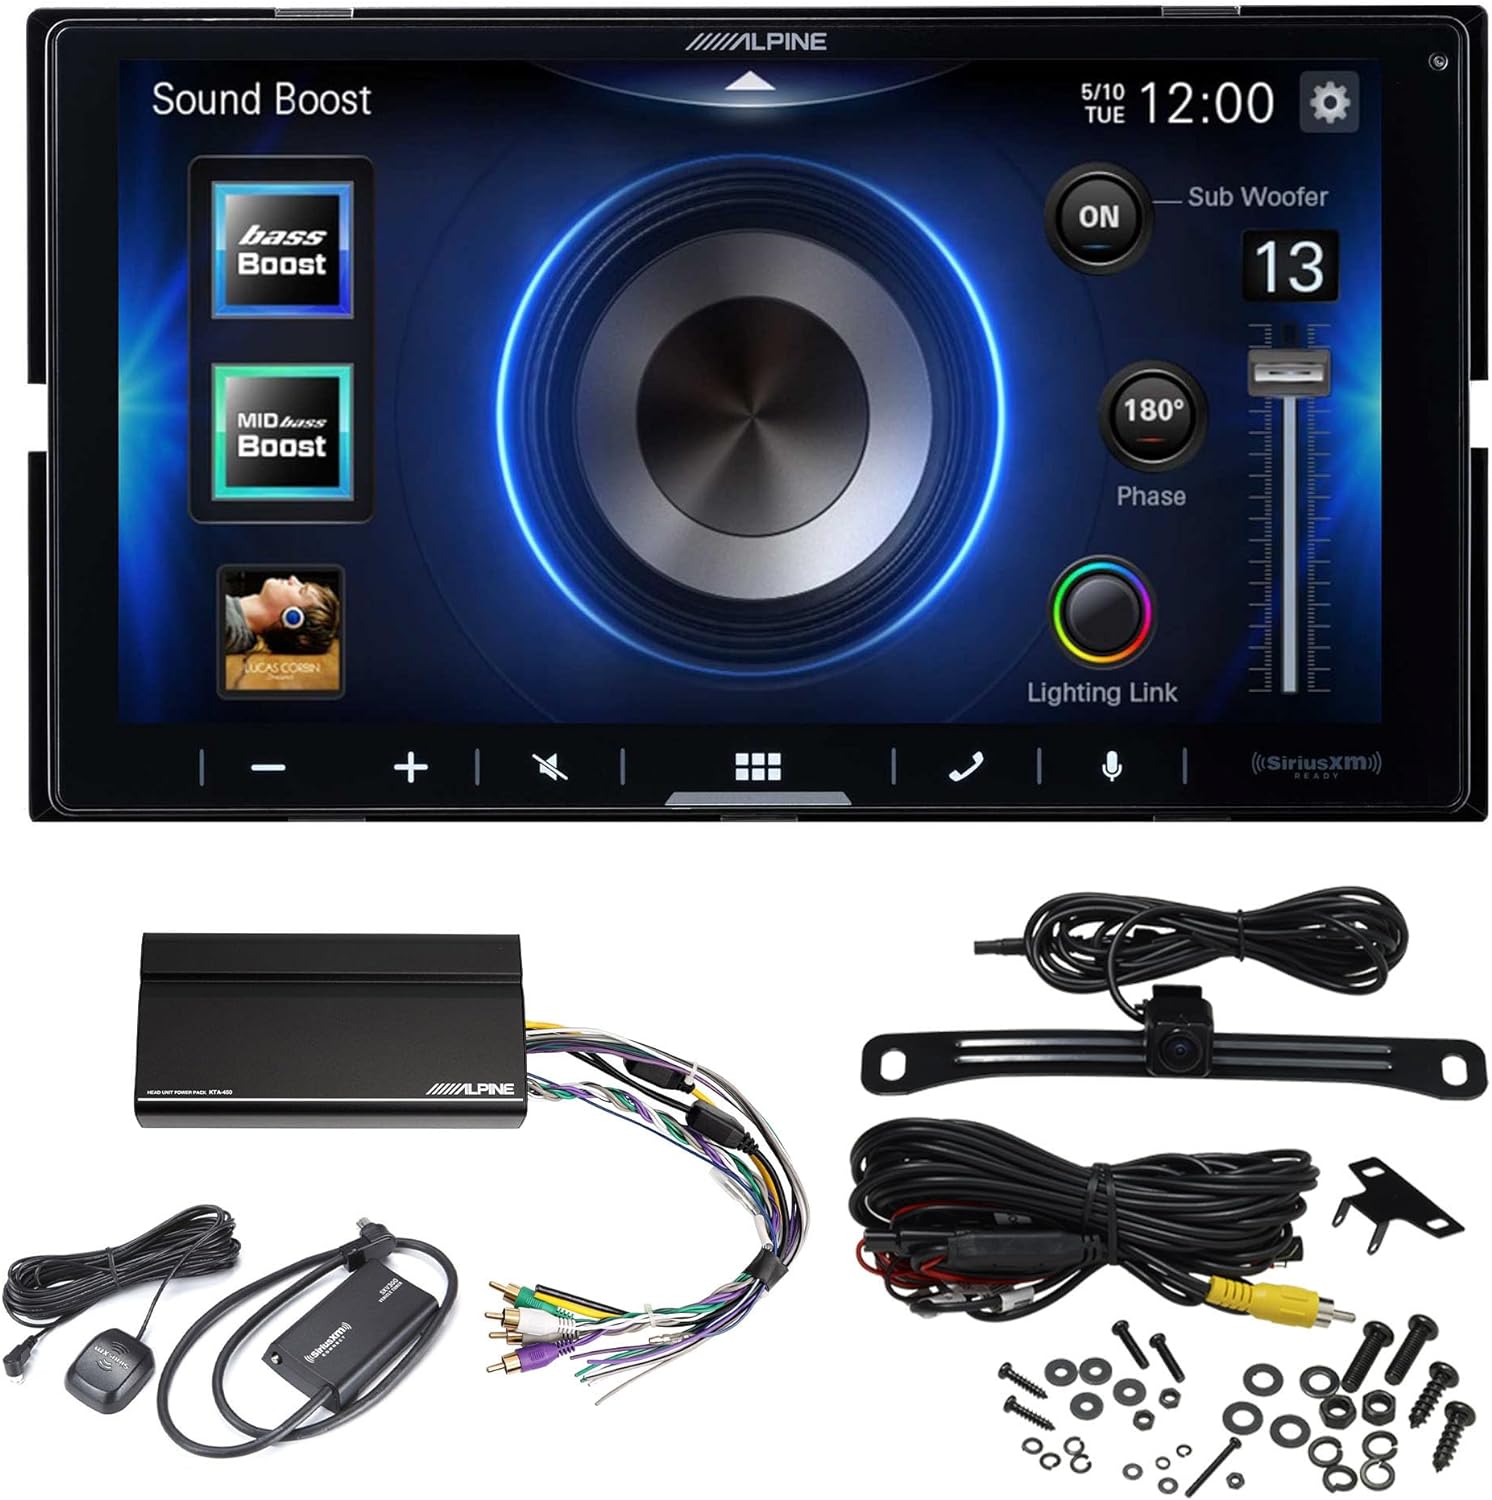 Alpine iLX-W670 7" Mechless Bluetooth Car Receiver Deck Deluxe Package with KTA-450 4-Channel Amplifier, Sirius XM SXV300 Tuner, and Backup Camera. Android Audio and iPhone Apple Car Play Integration